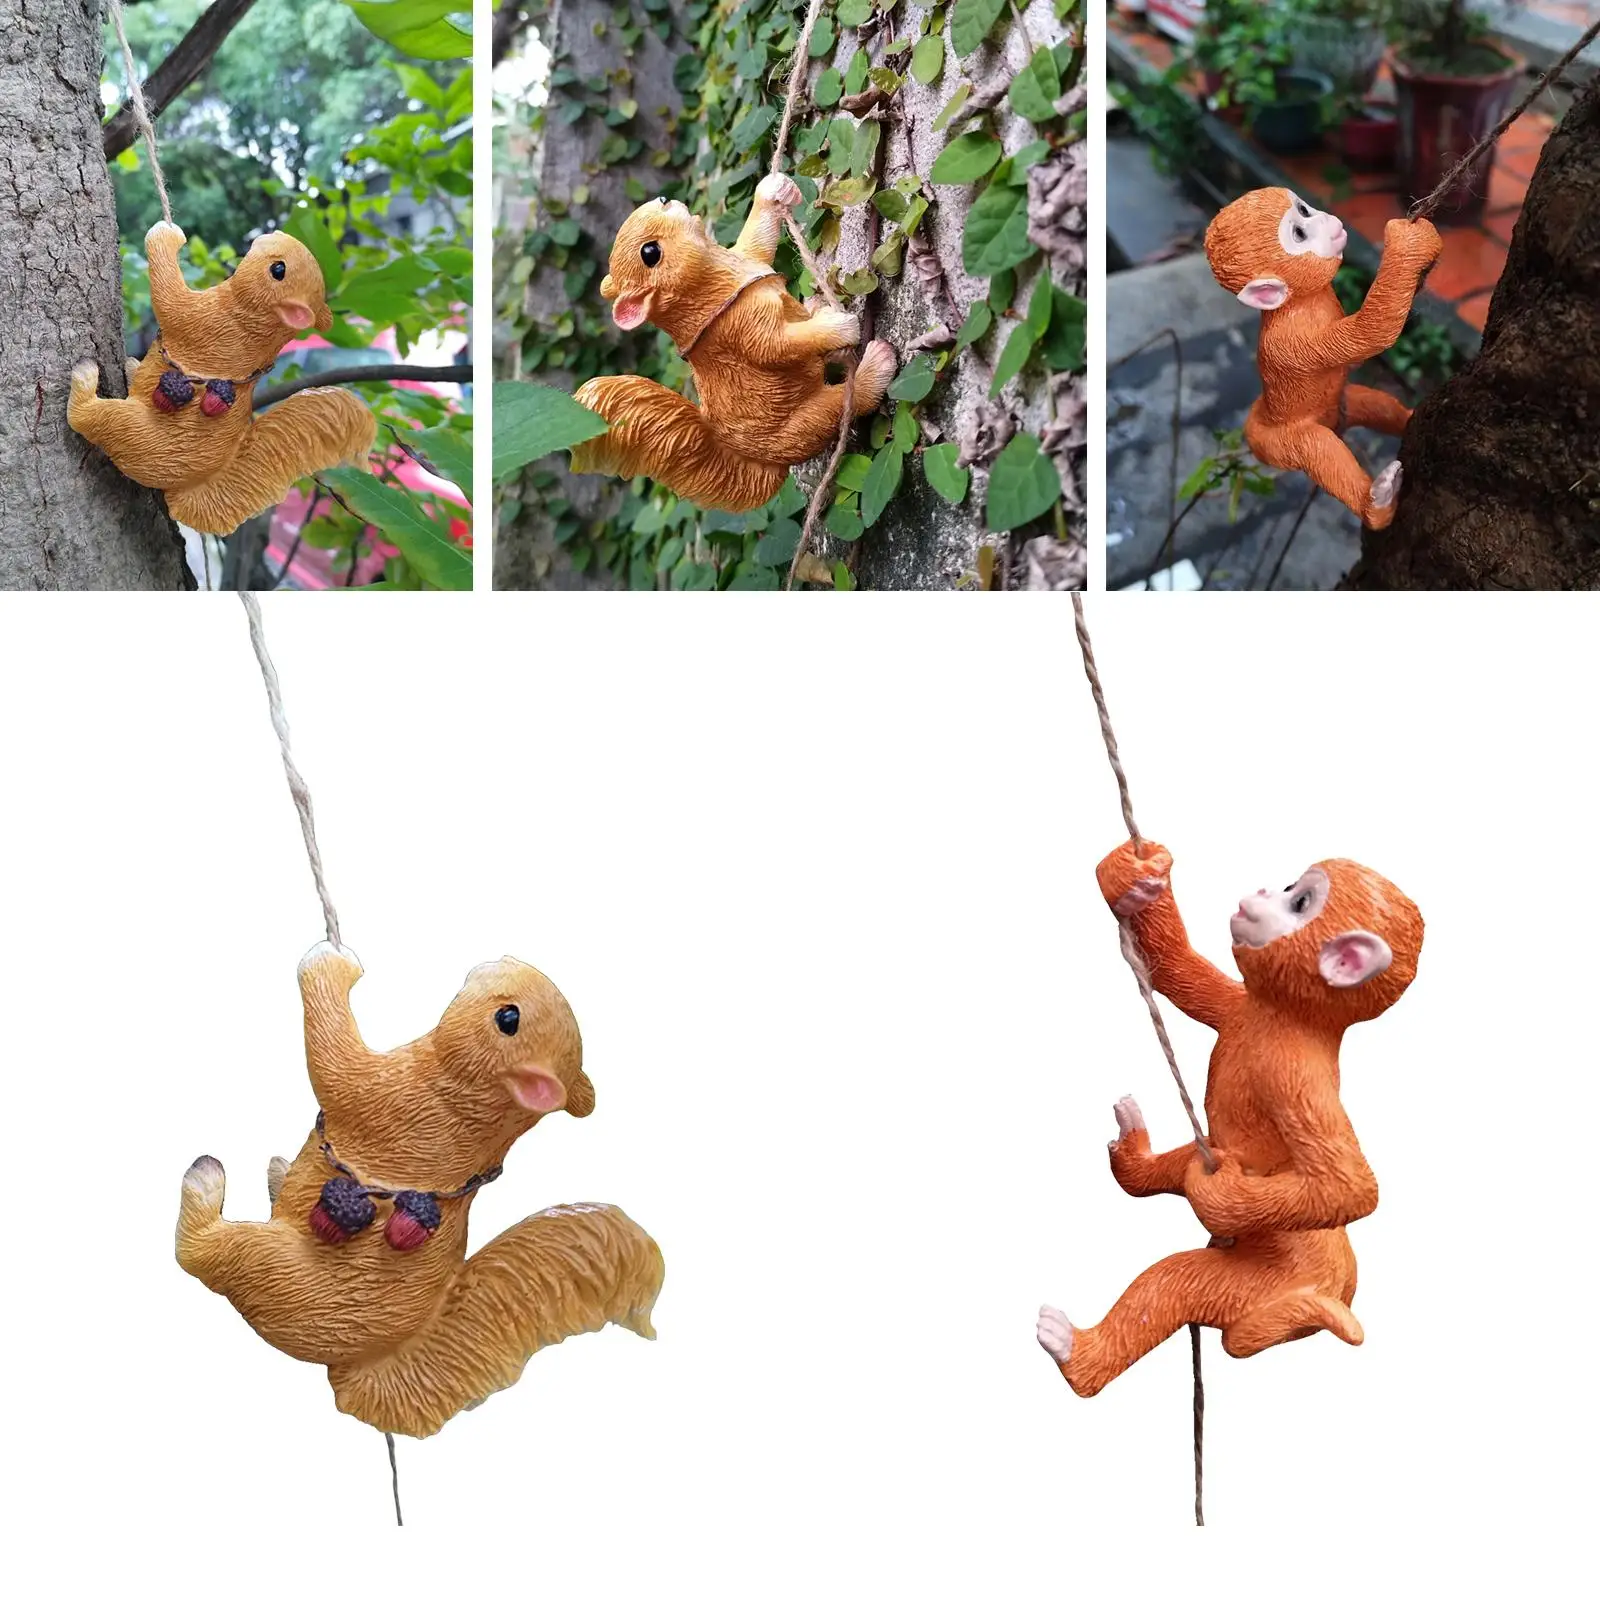 Climbing Animal Figurine Plant Pot Hanger Hanging Ornament Resin for Patio Fence Tree